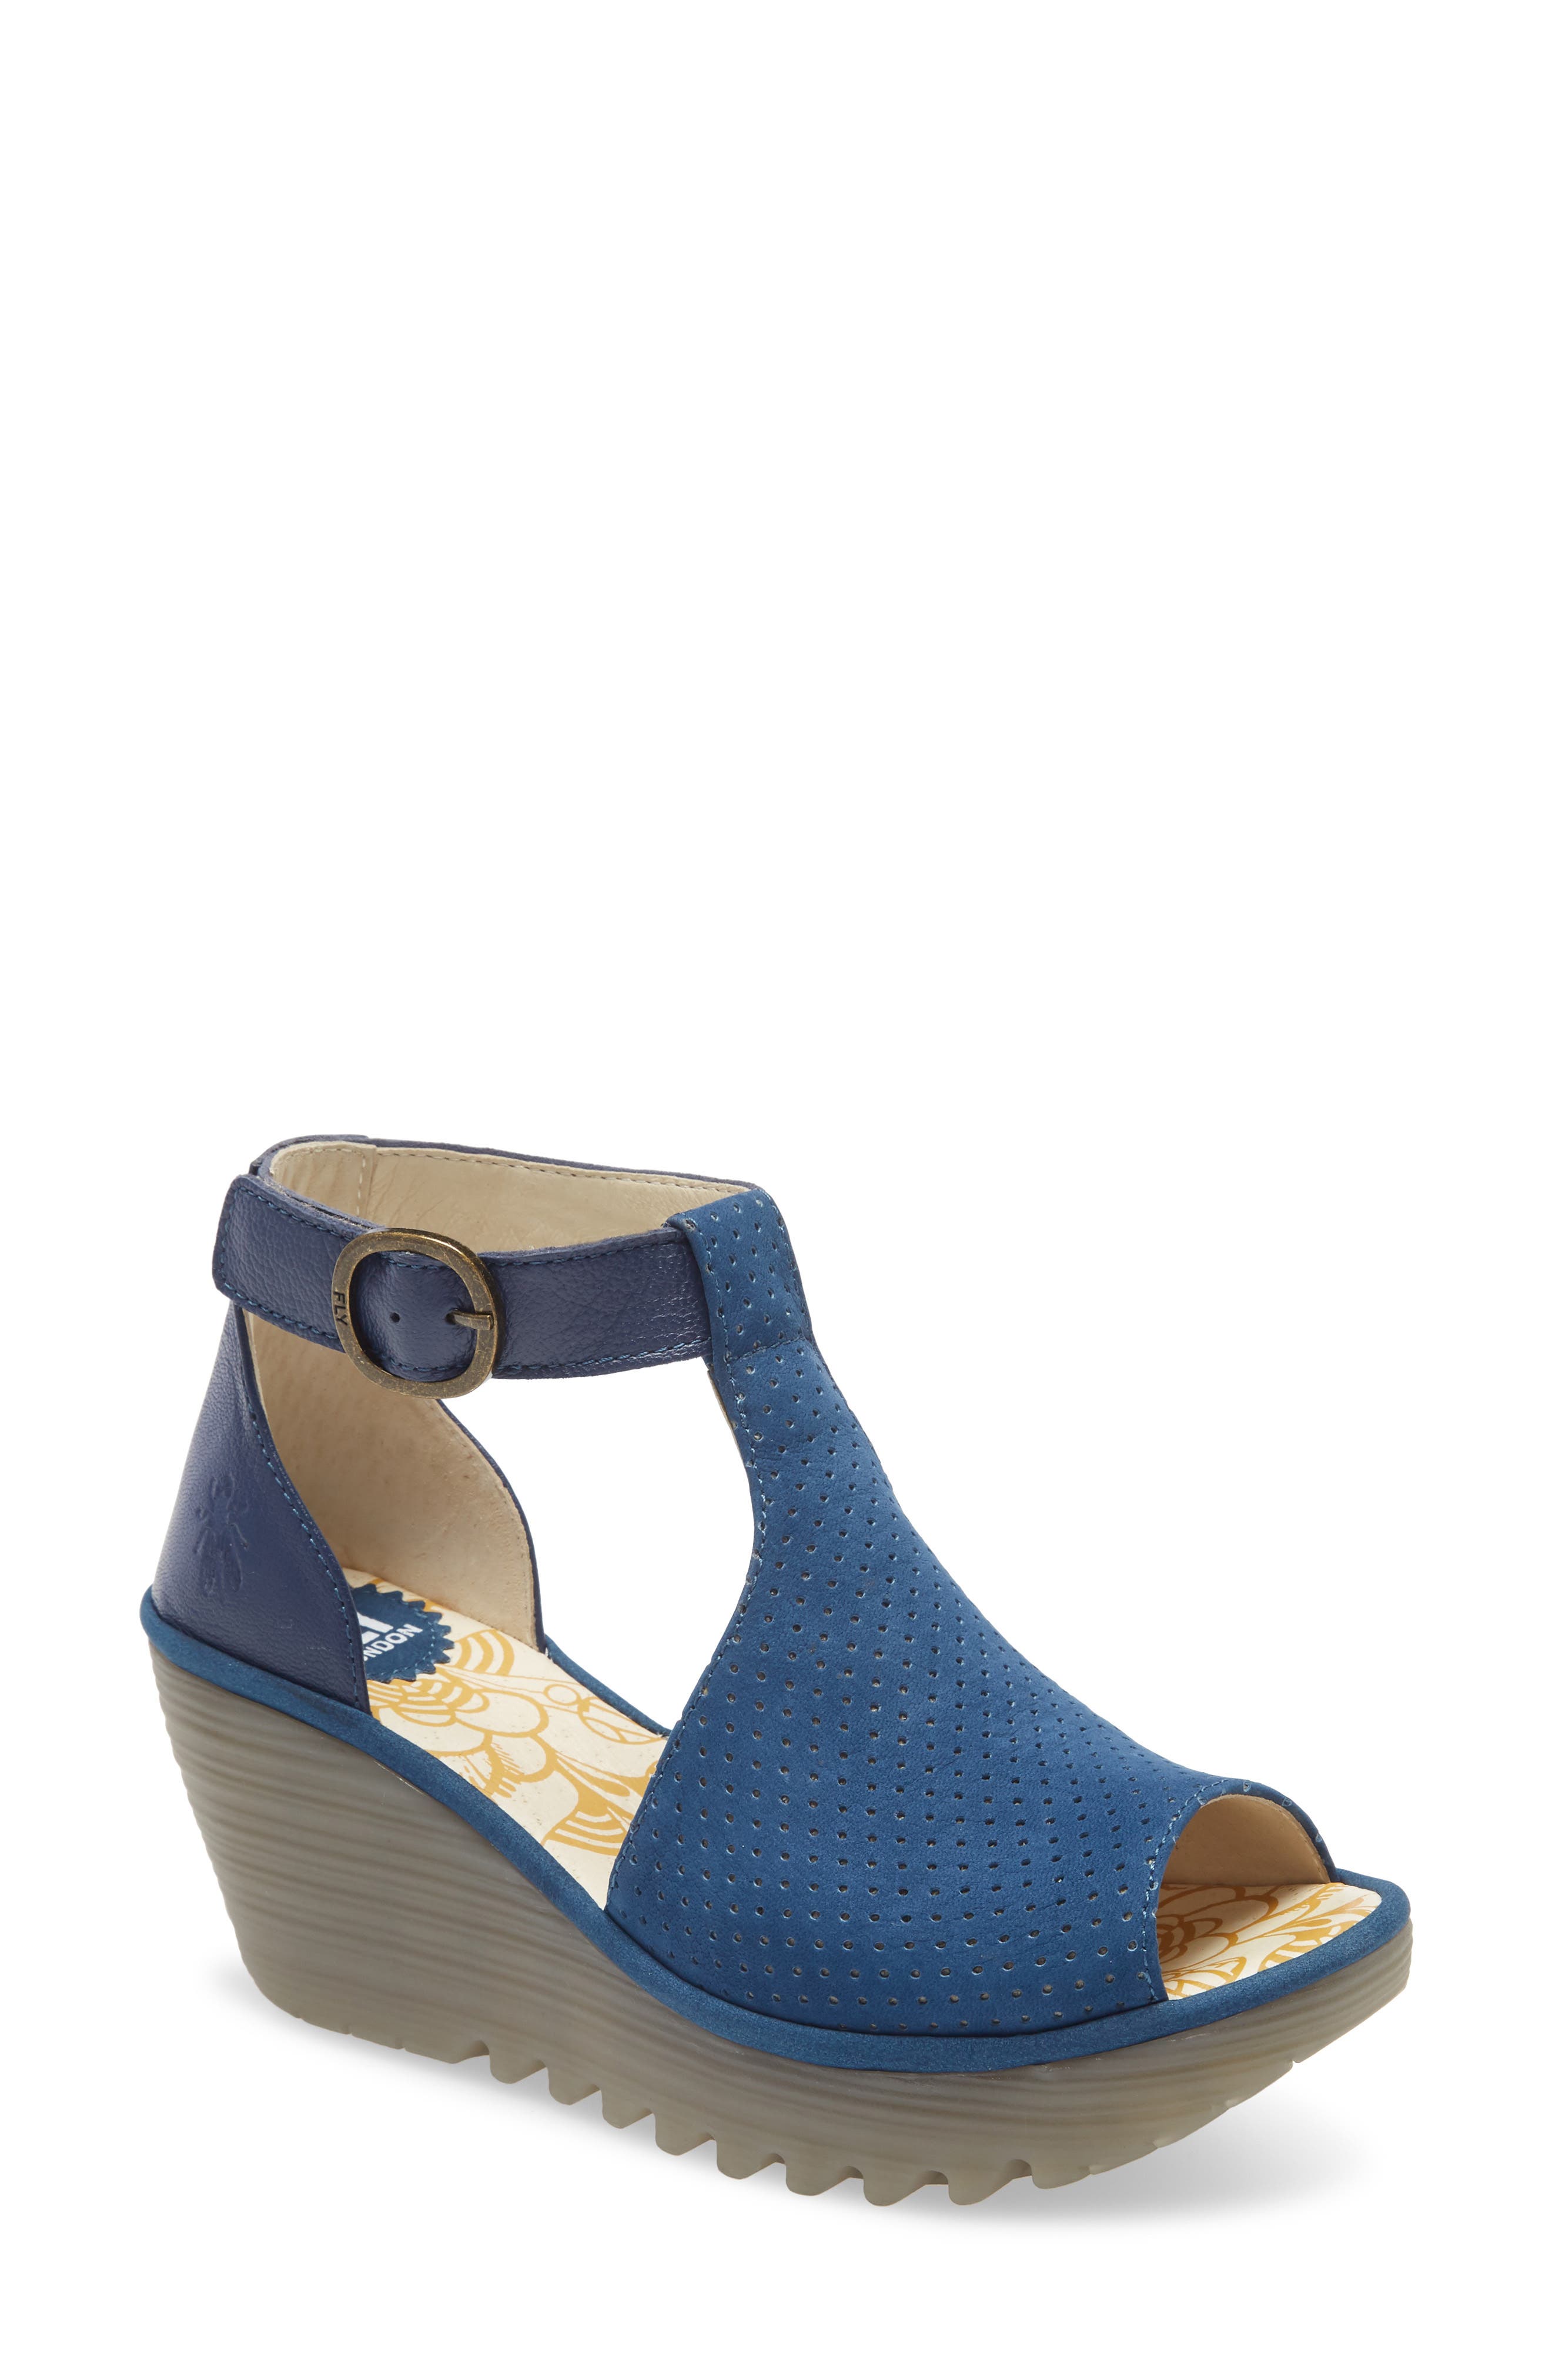 blue fly london shoes